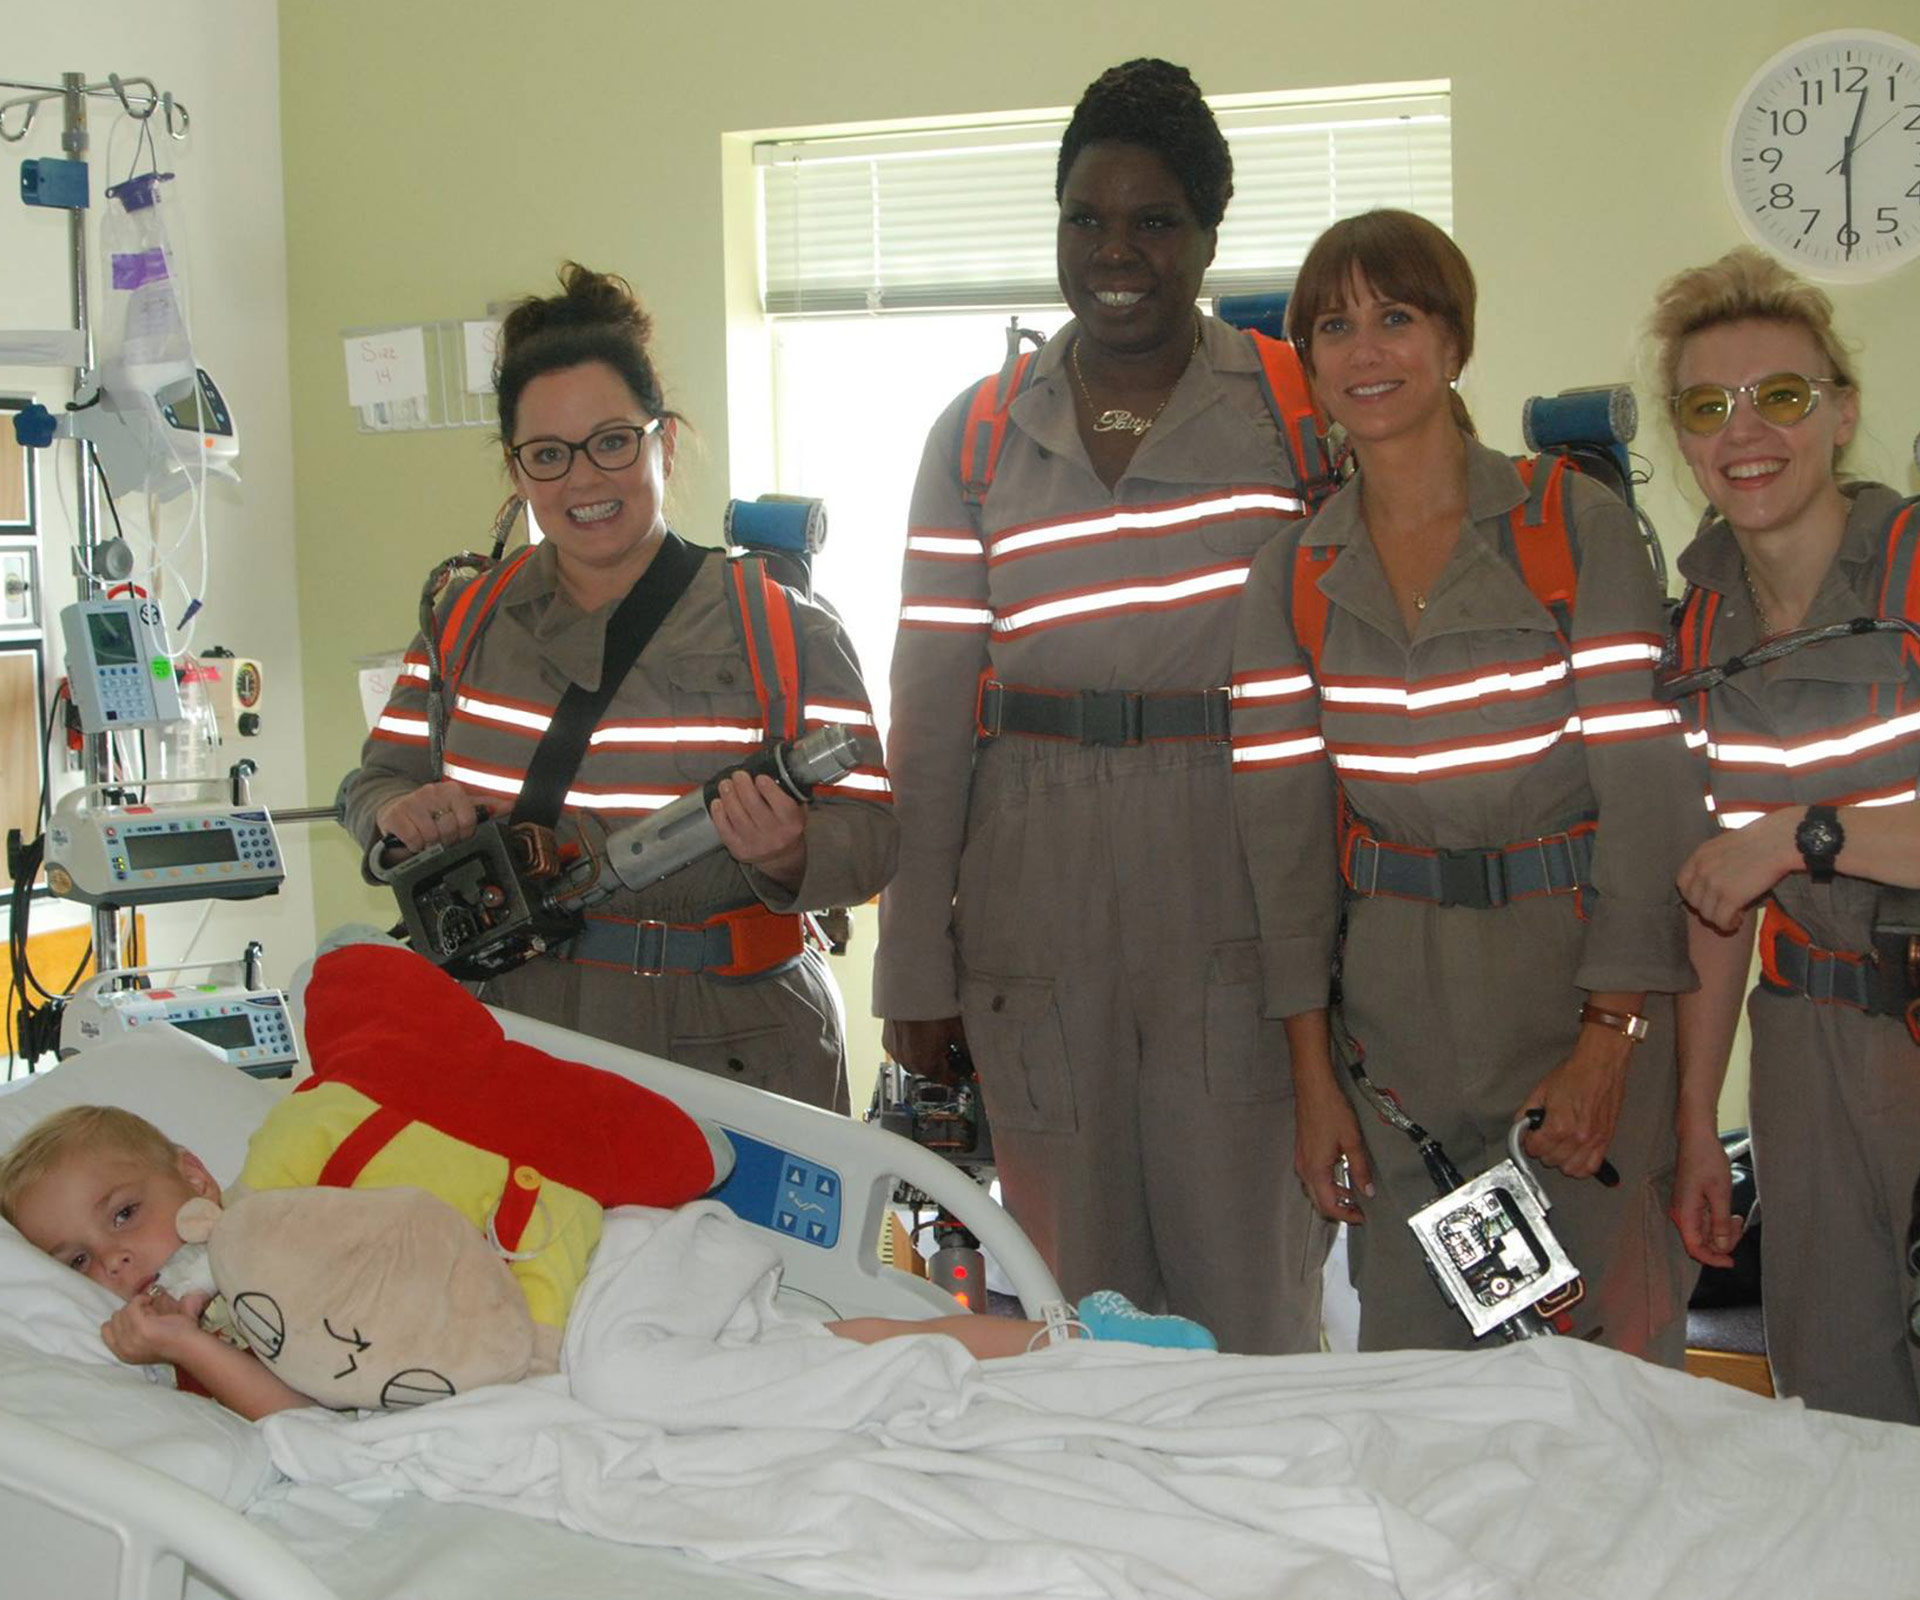 Who you gonna call? Melissa McCartney, Kristin Wiig and the cast of Ghostbusters reboot visit children’s hospital